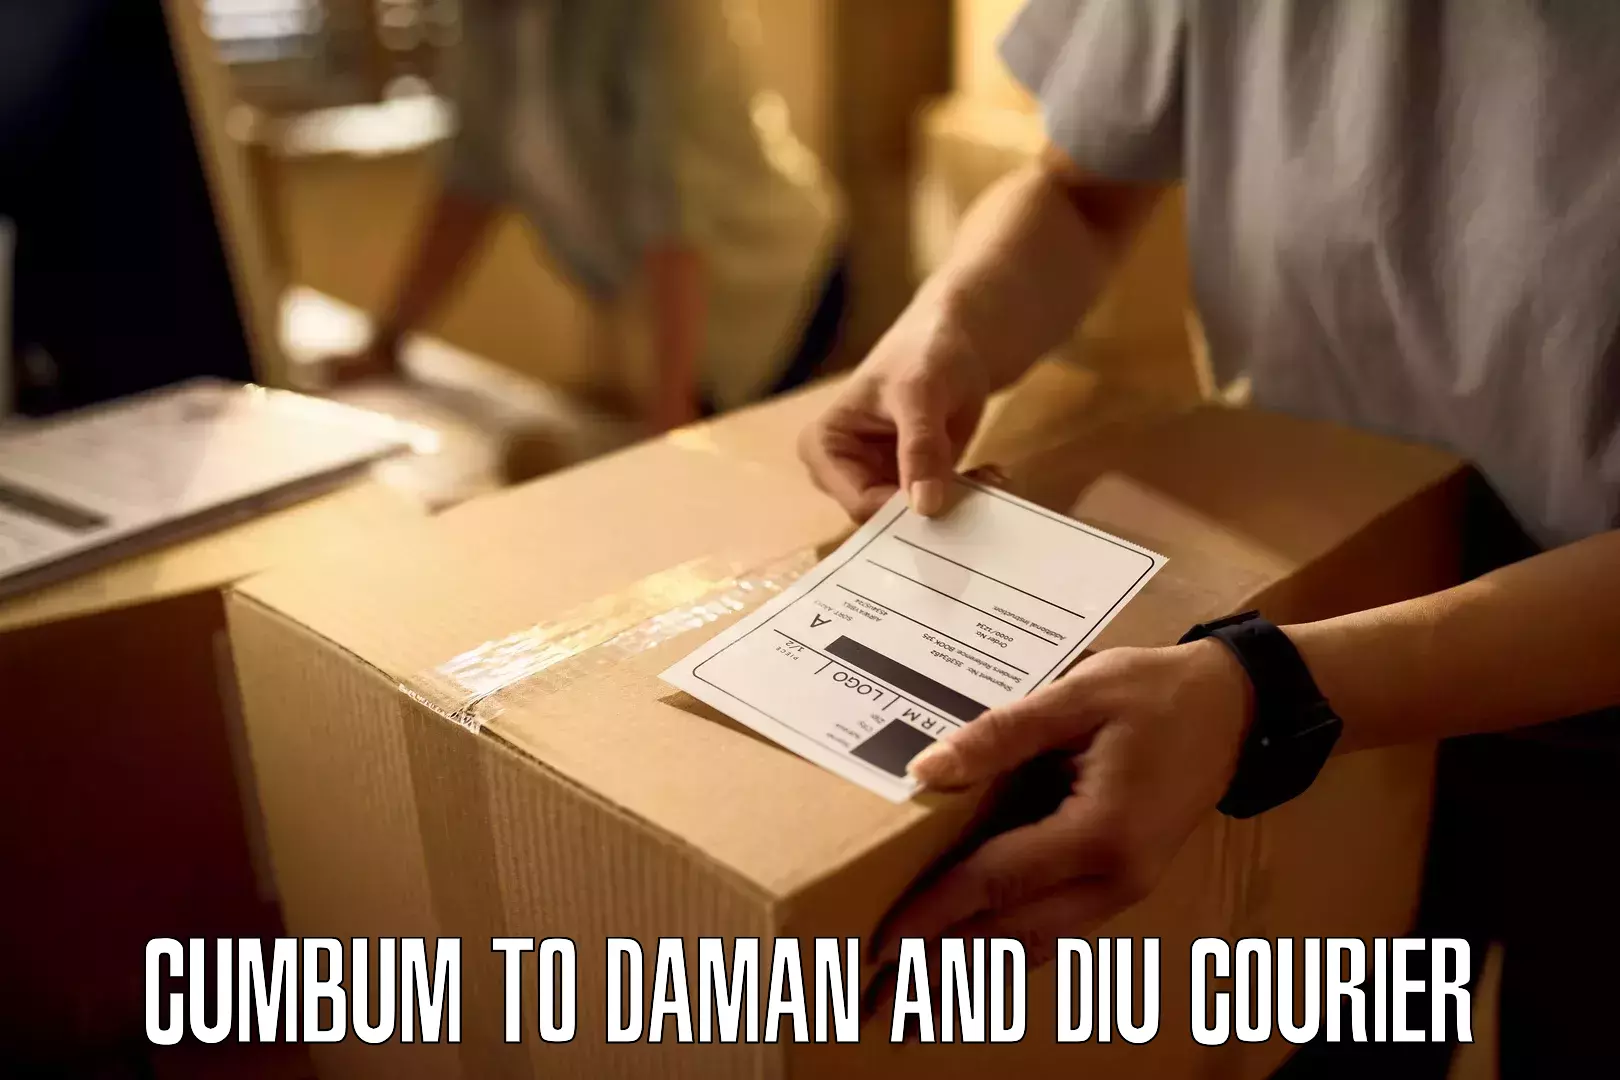 Express delivery network Cumbum to Daman and Diu